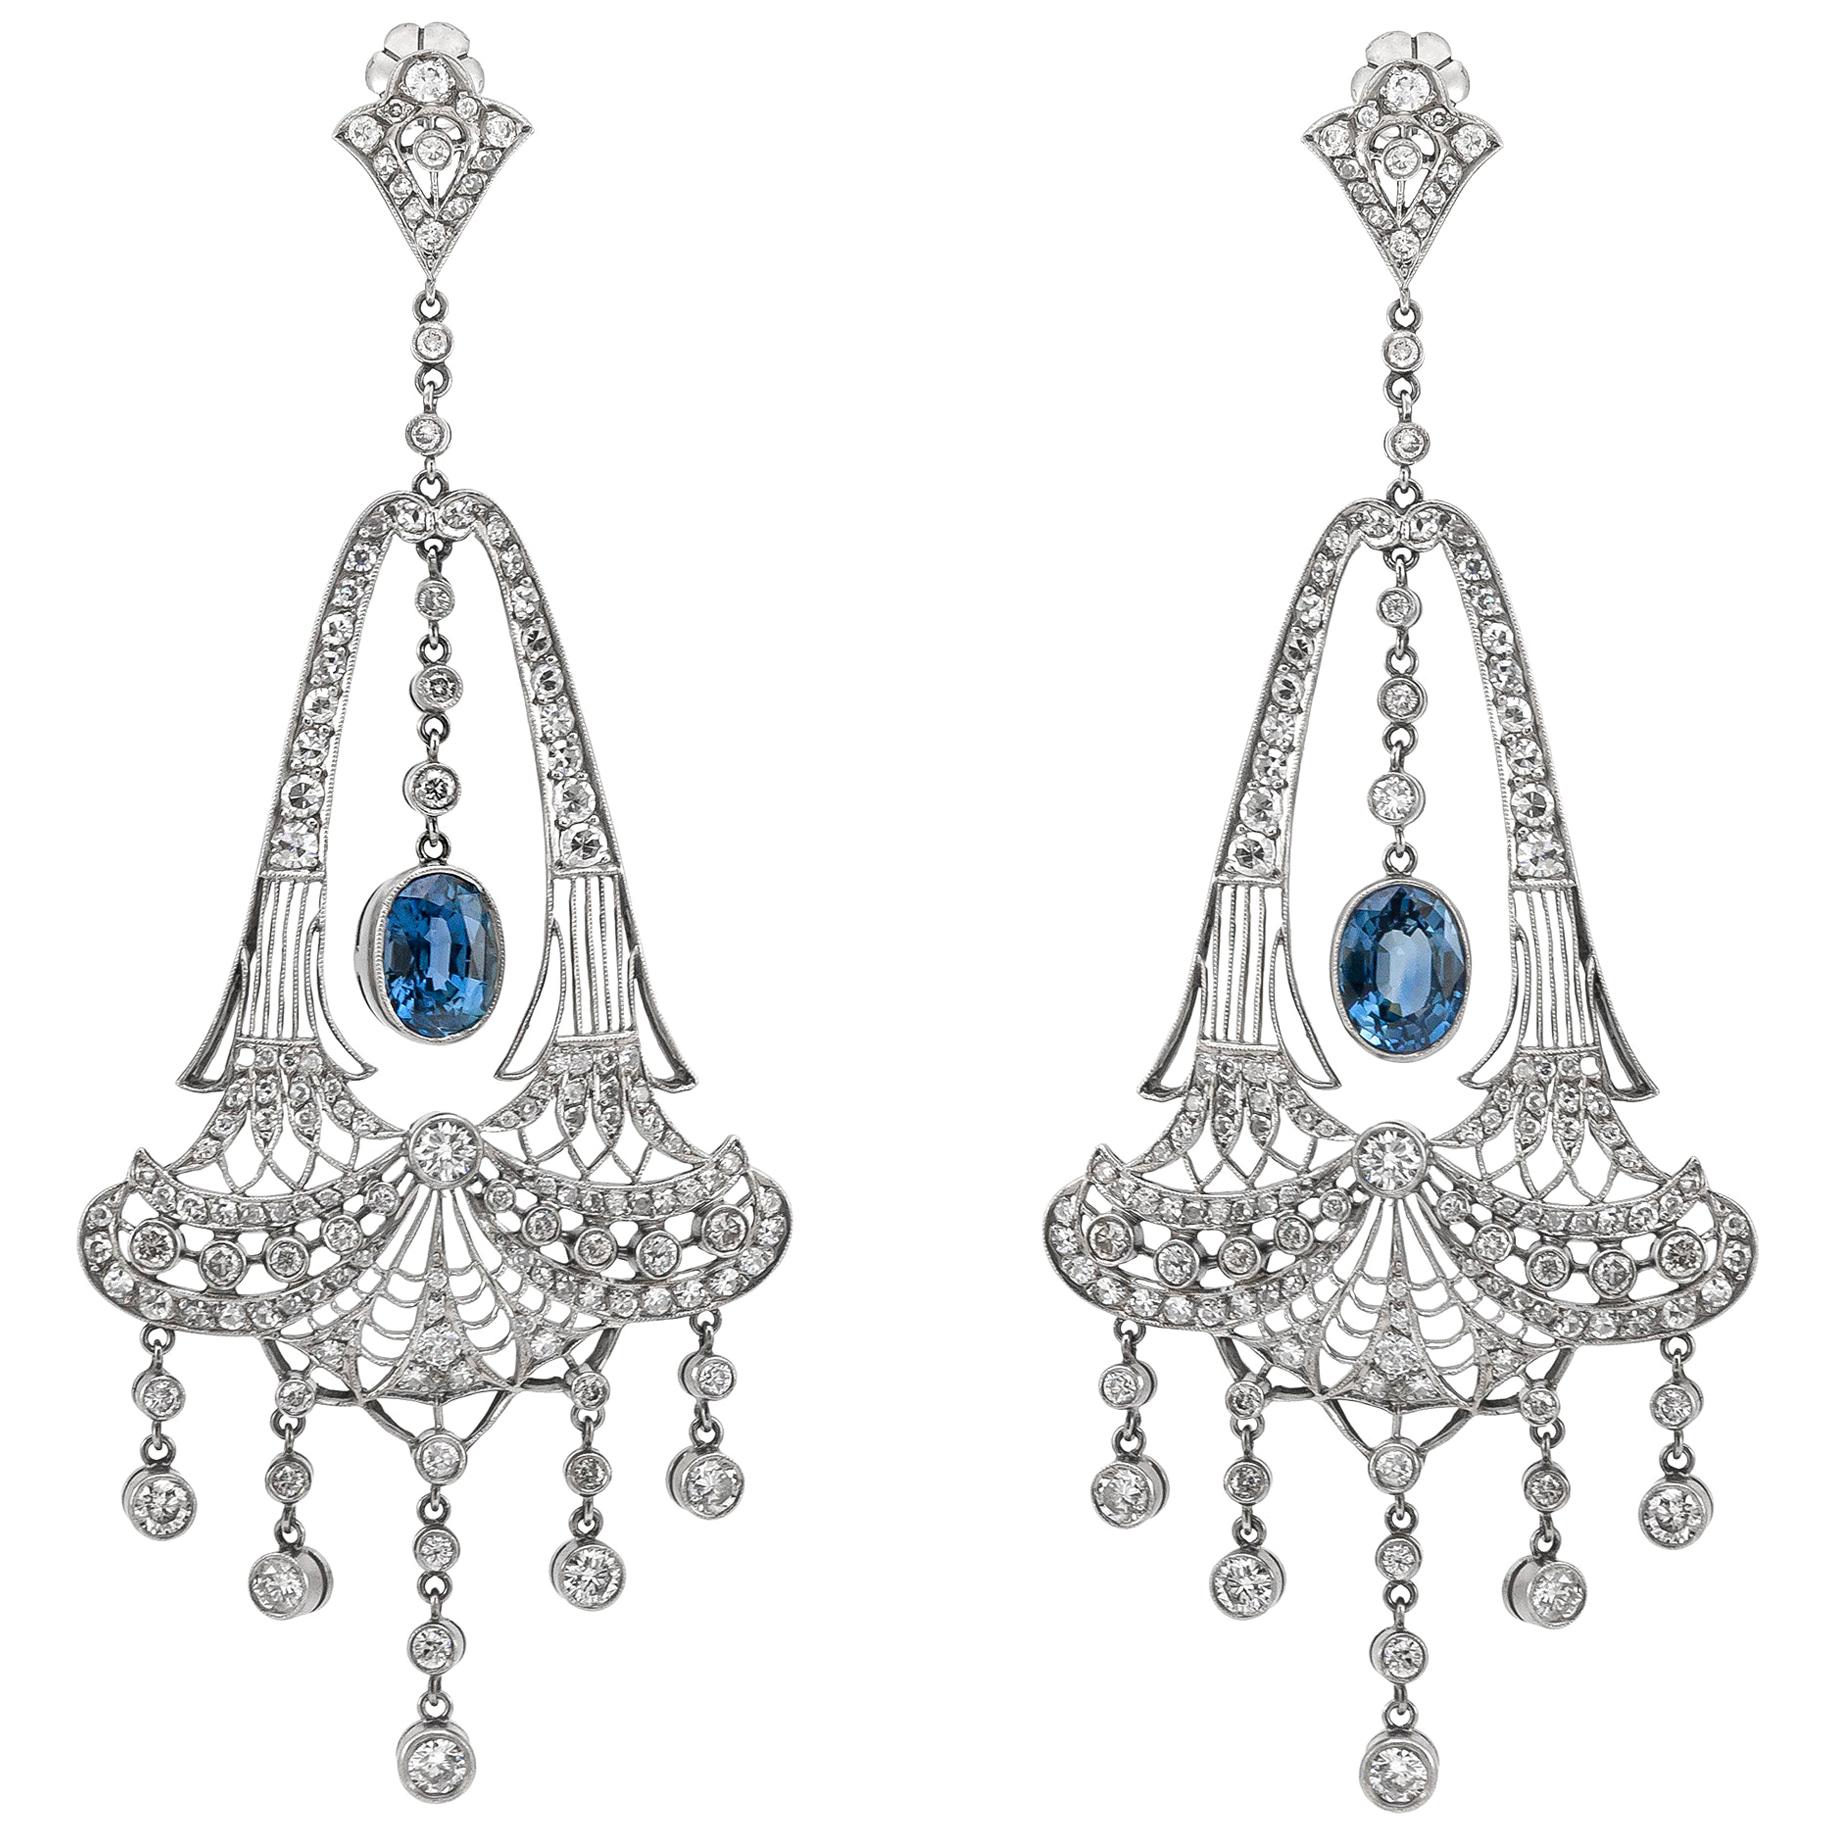 Beautiful Chandelier Drop Earrings with Sapphire and Diamonds